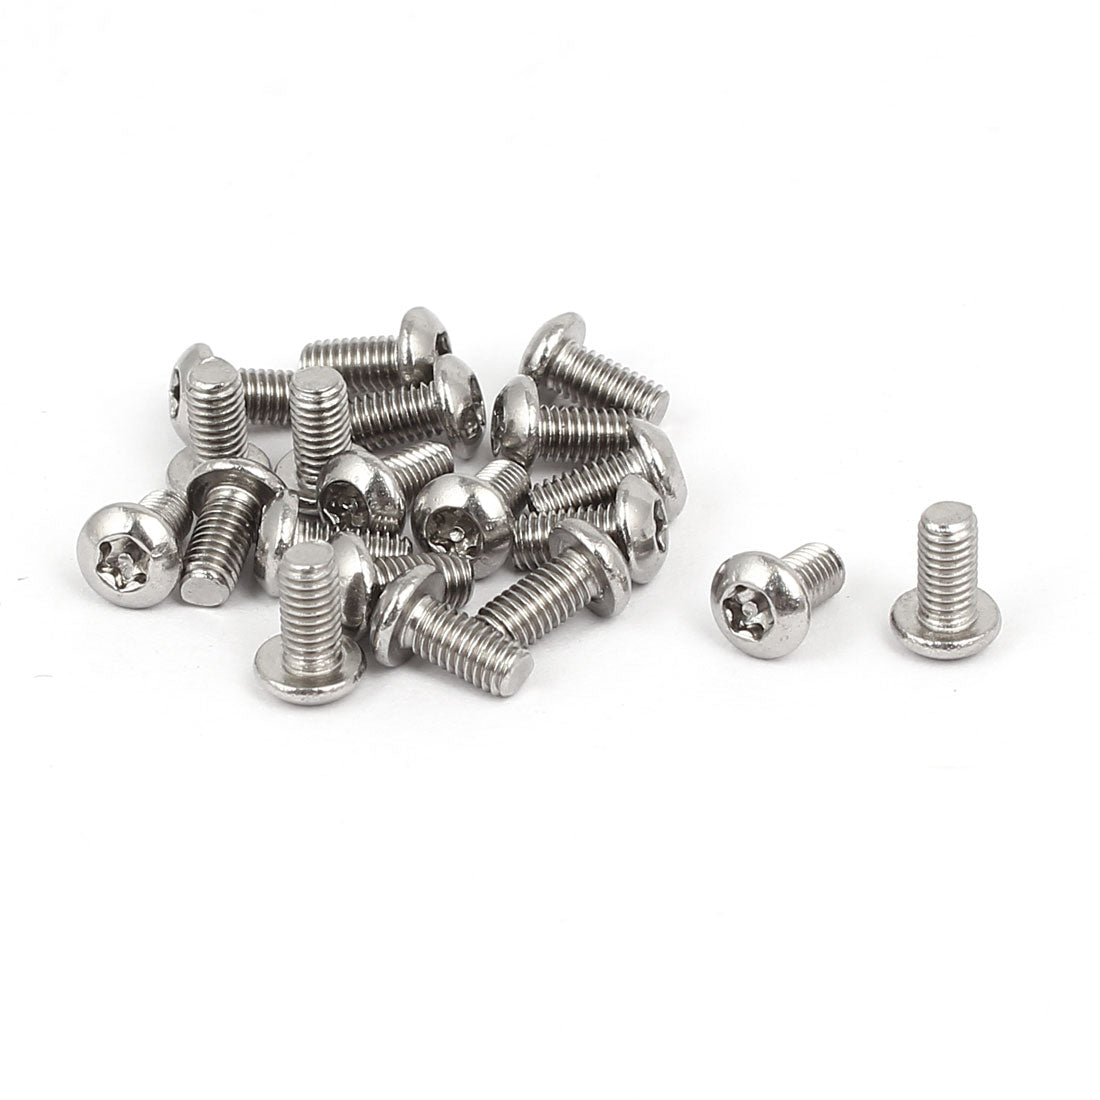 uxcell Uxcell M3x6mm 304 Stainless Steel Button Head Torx Security Machine Screws 20pcs